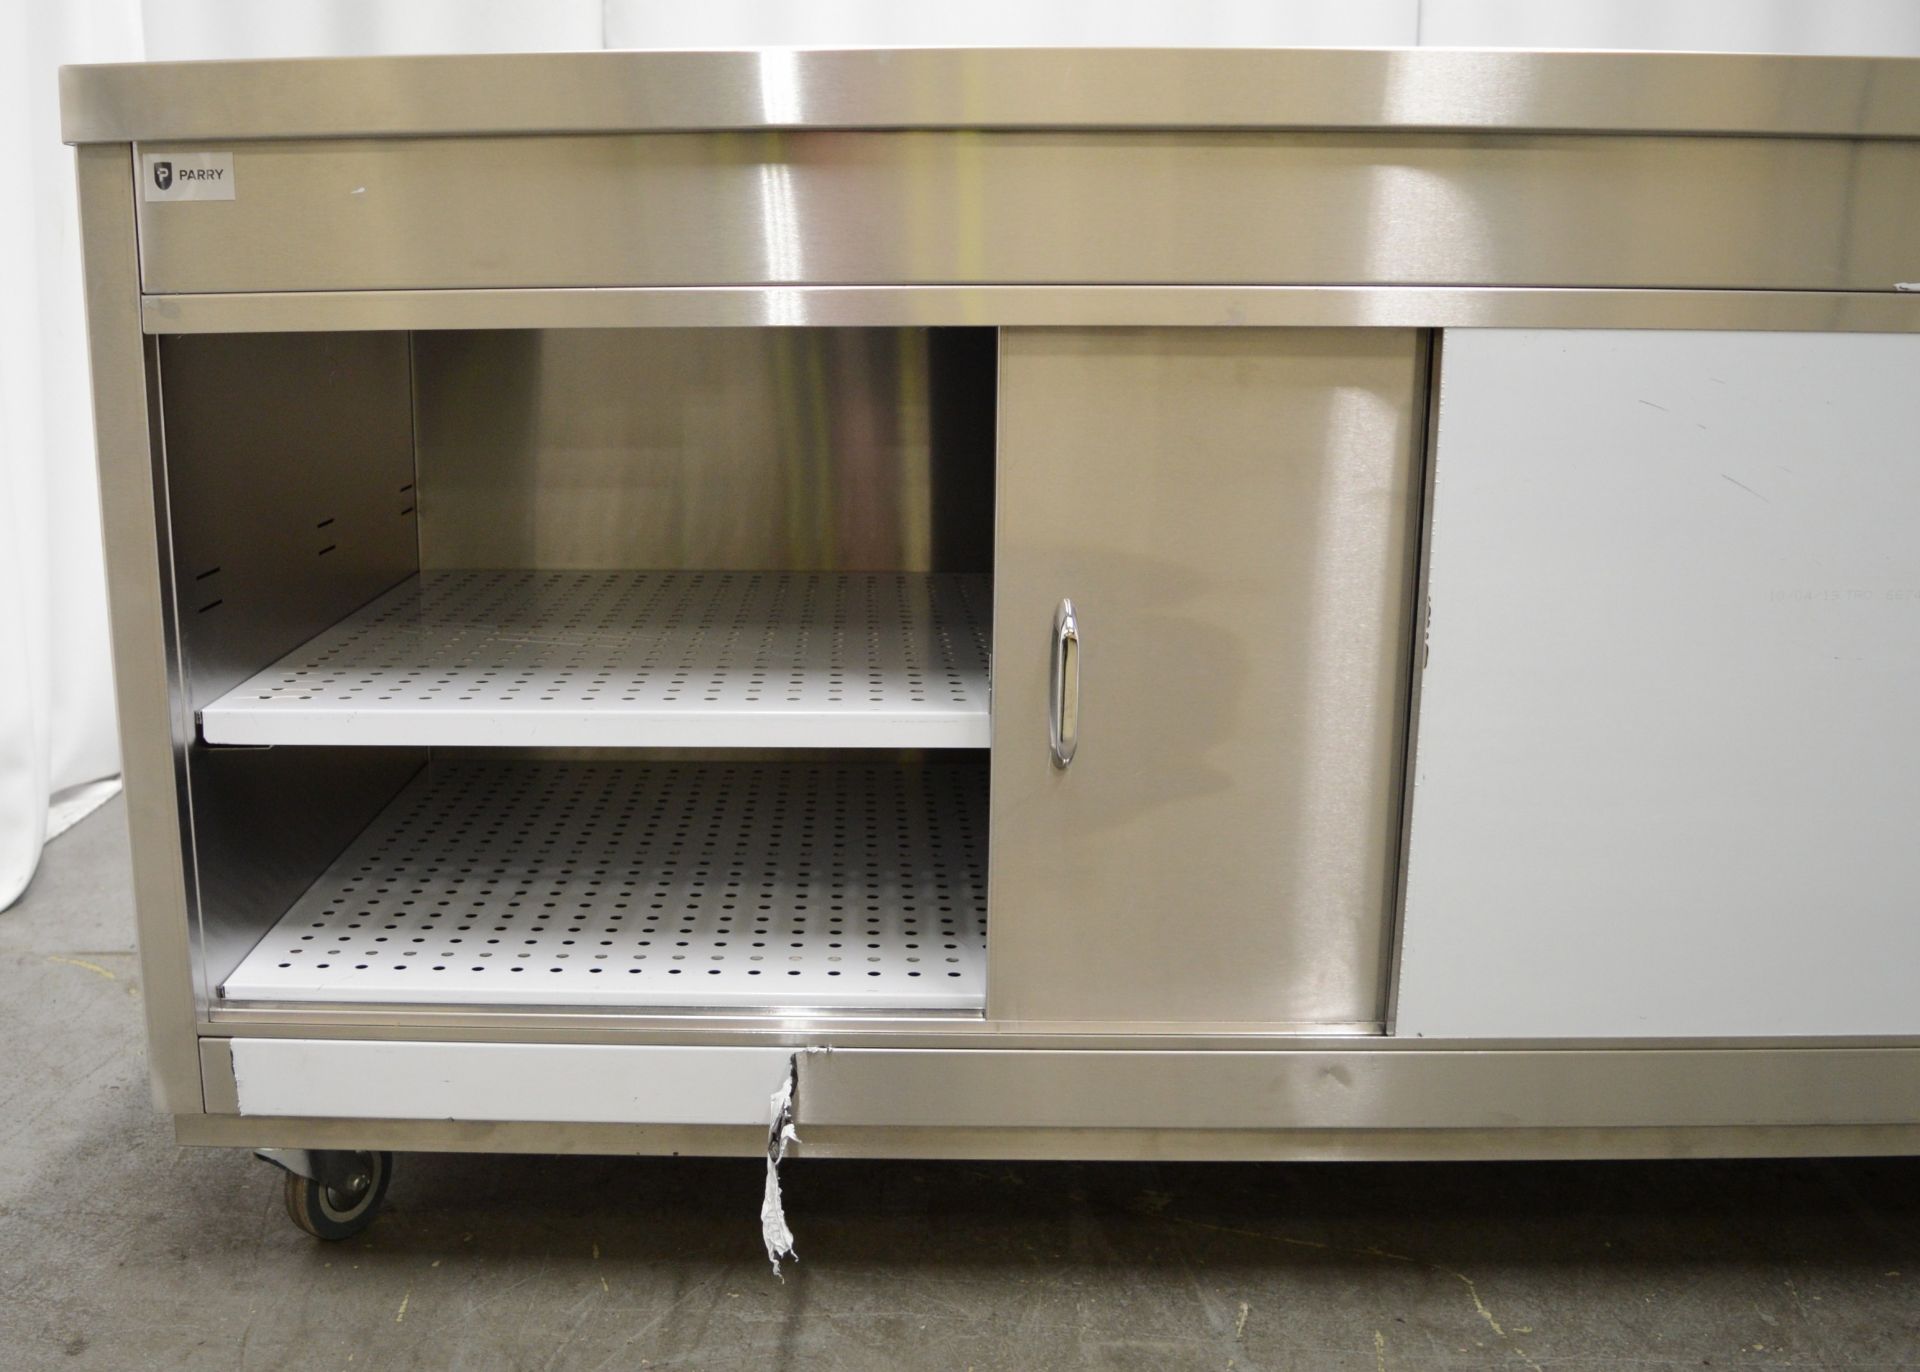 Parry HOT0137 stainless steel hot cupboard, 1800x800x900(LxDxH) 230v - Image 2 of 7